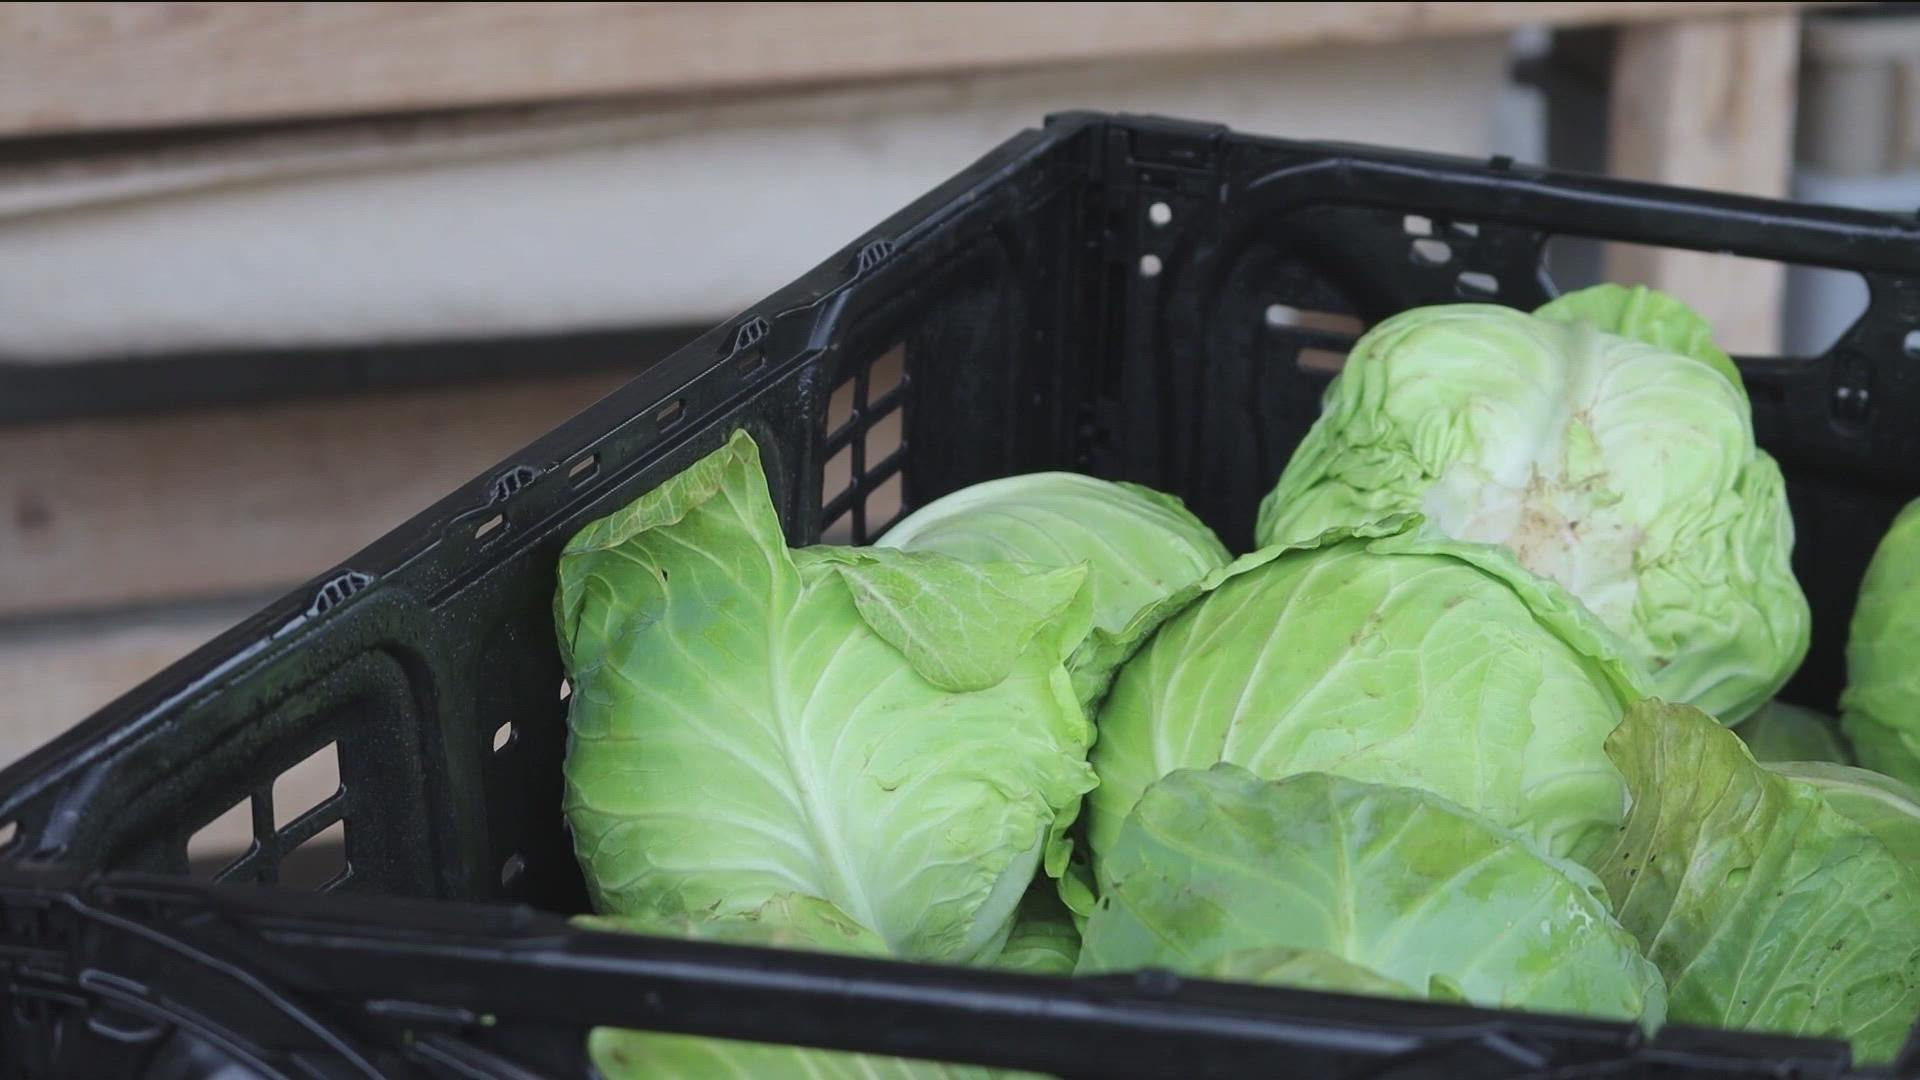 As the holiday season approaches, demand at food pantries is at an all-time high. Travis County commissioners approved $4.9 million to increase access to fresh food.